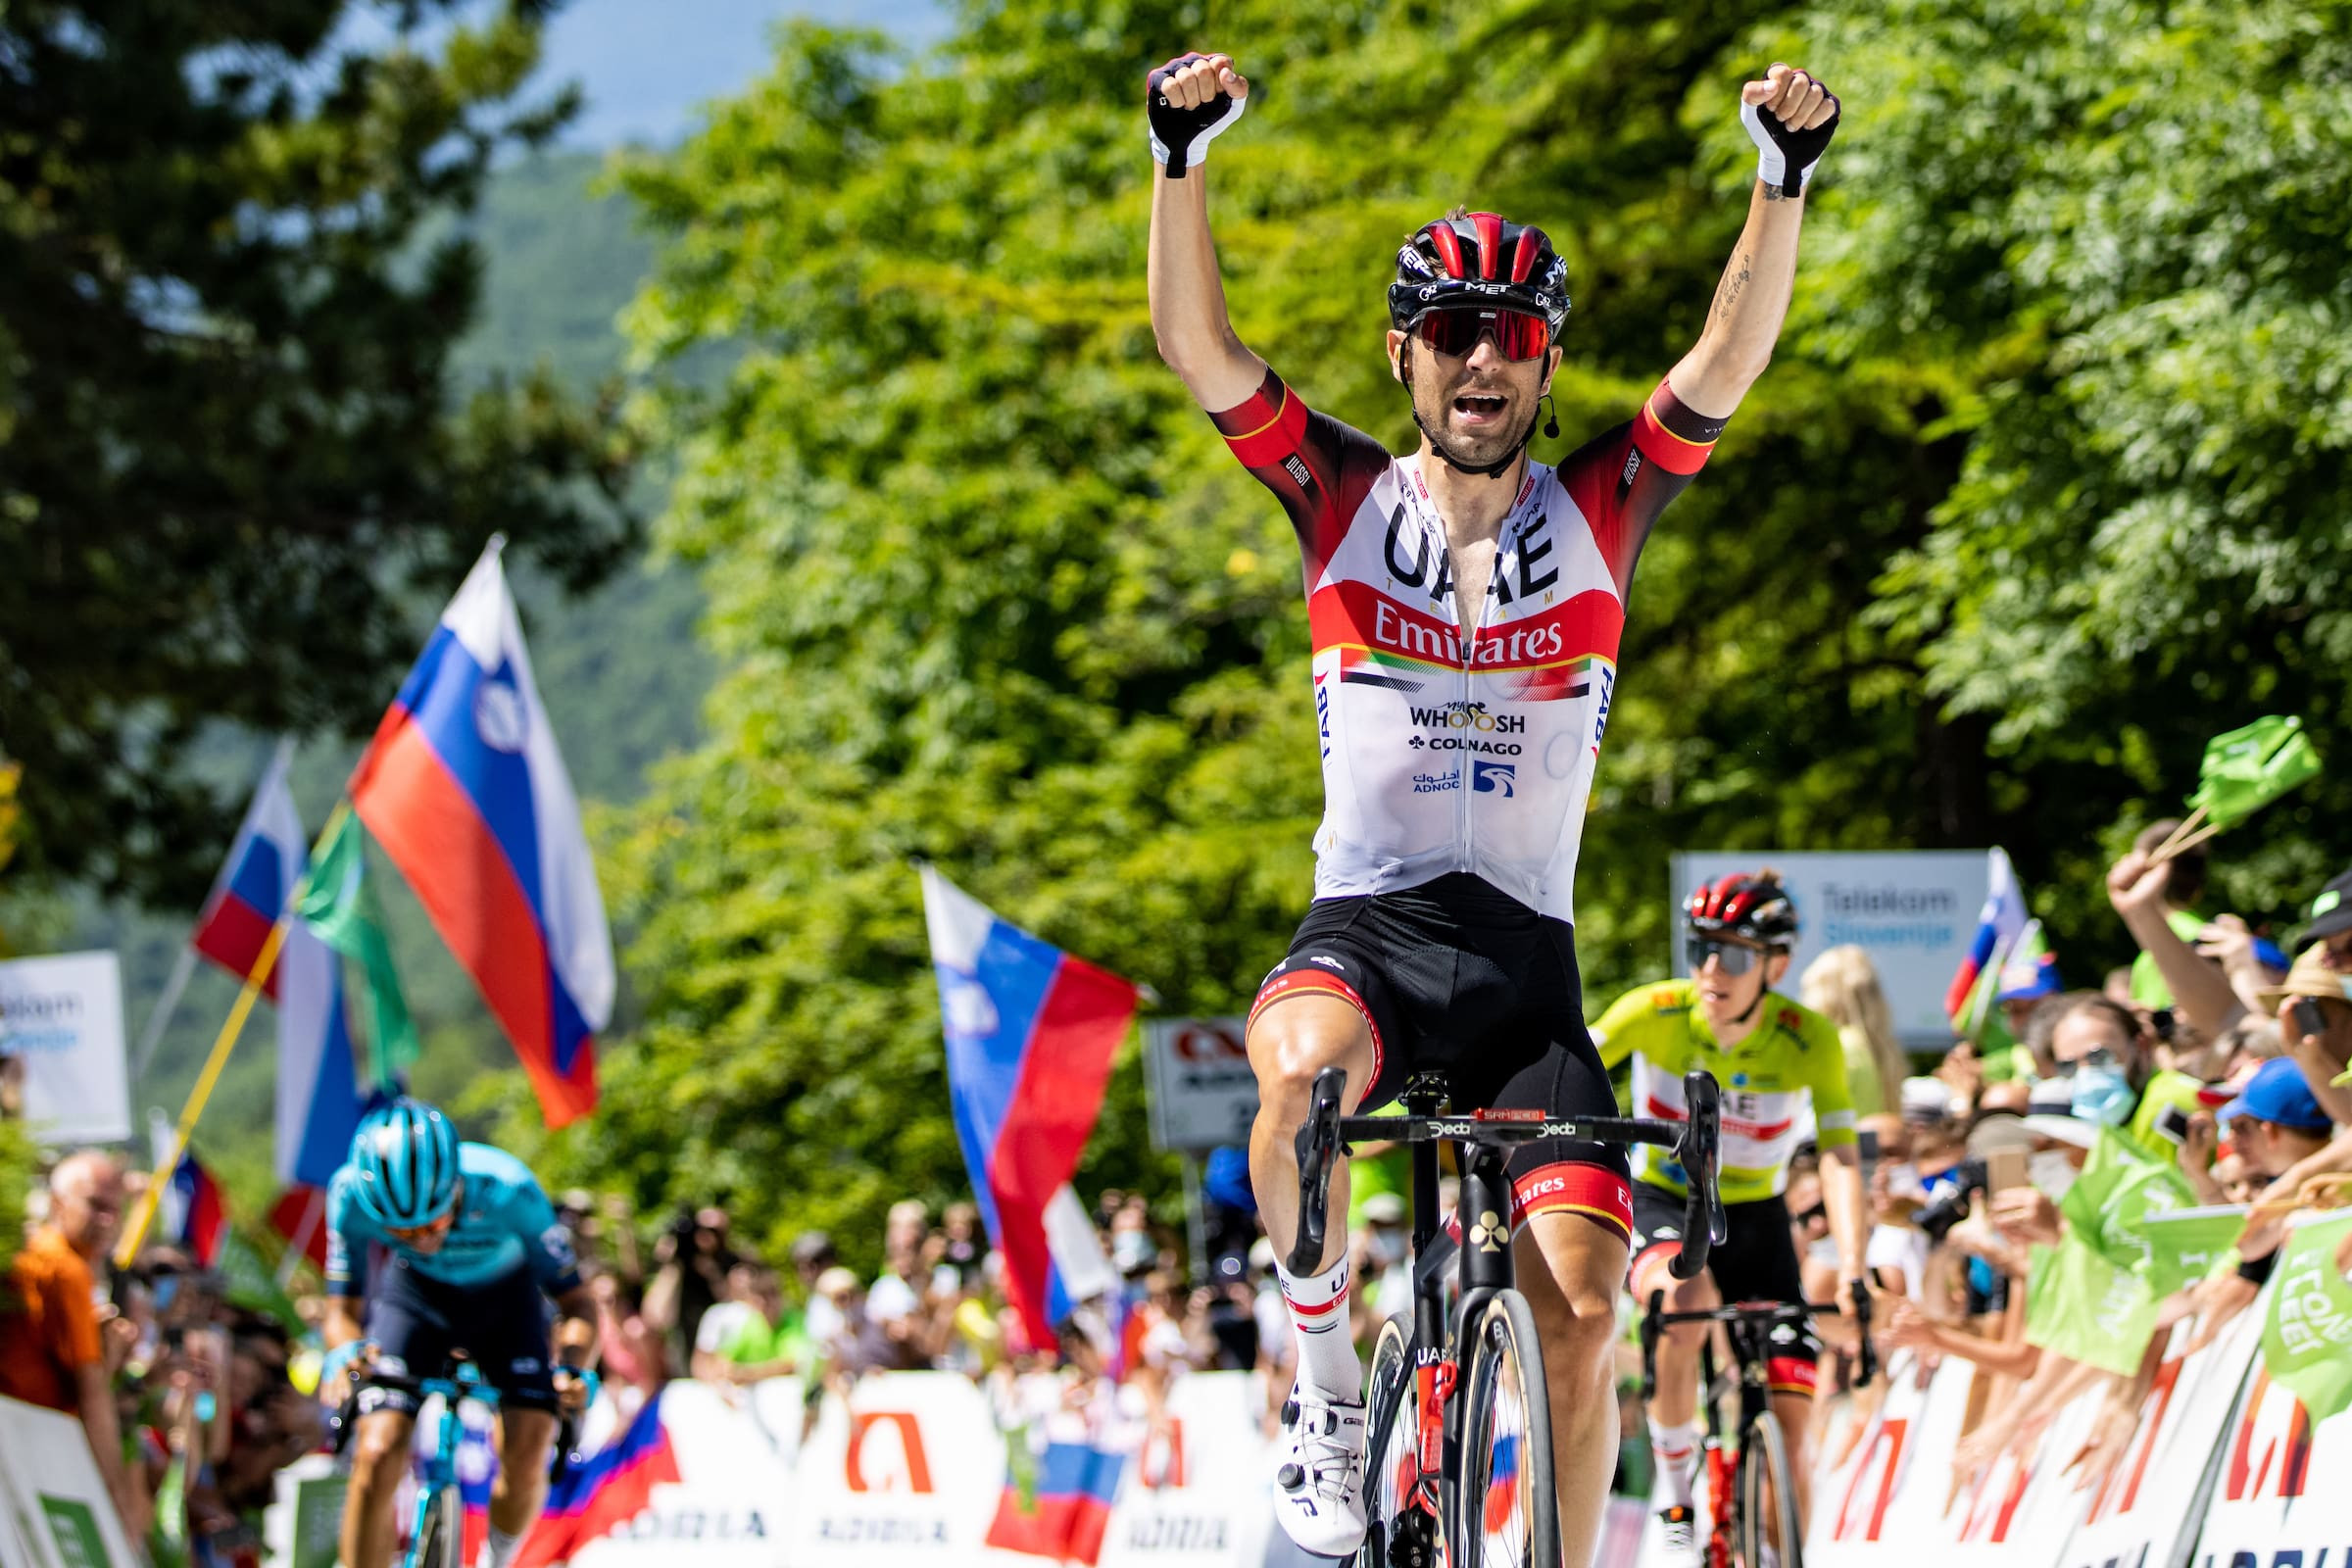 Ullisi takes the queen stage, Pogačar stays in green